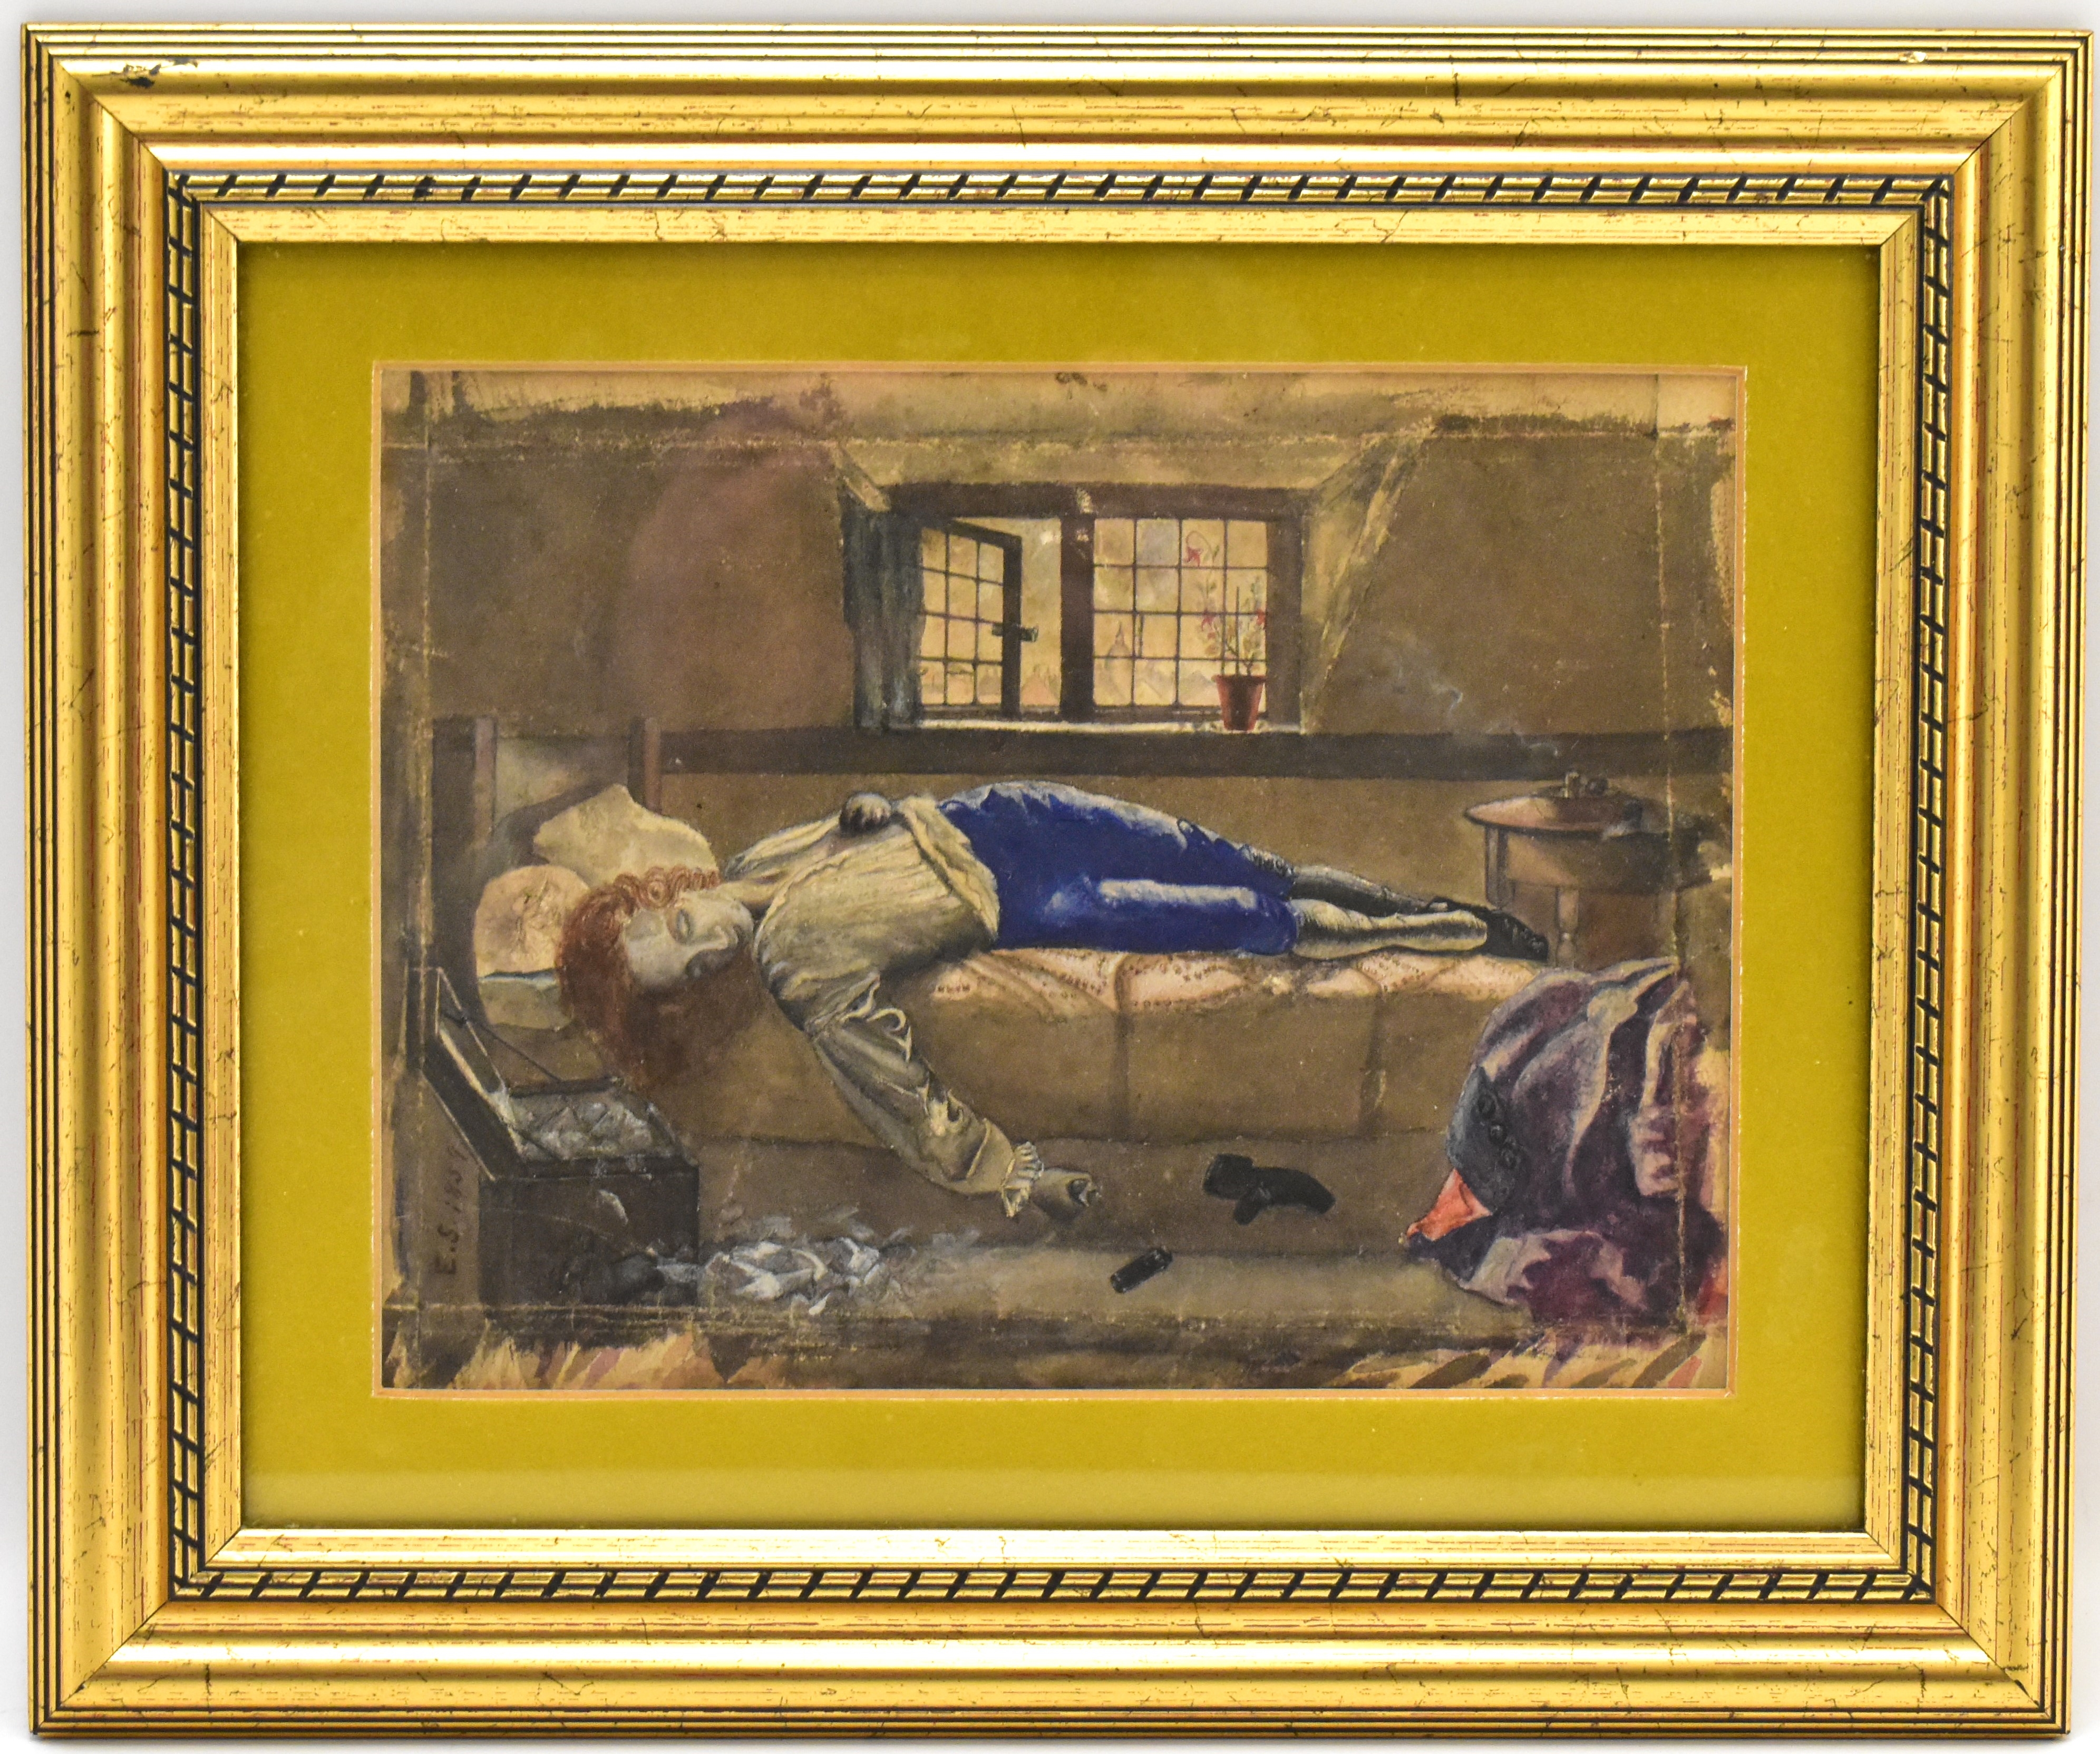 Henry Wallis, The Death of Chatterton (1858)